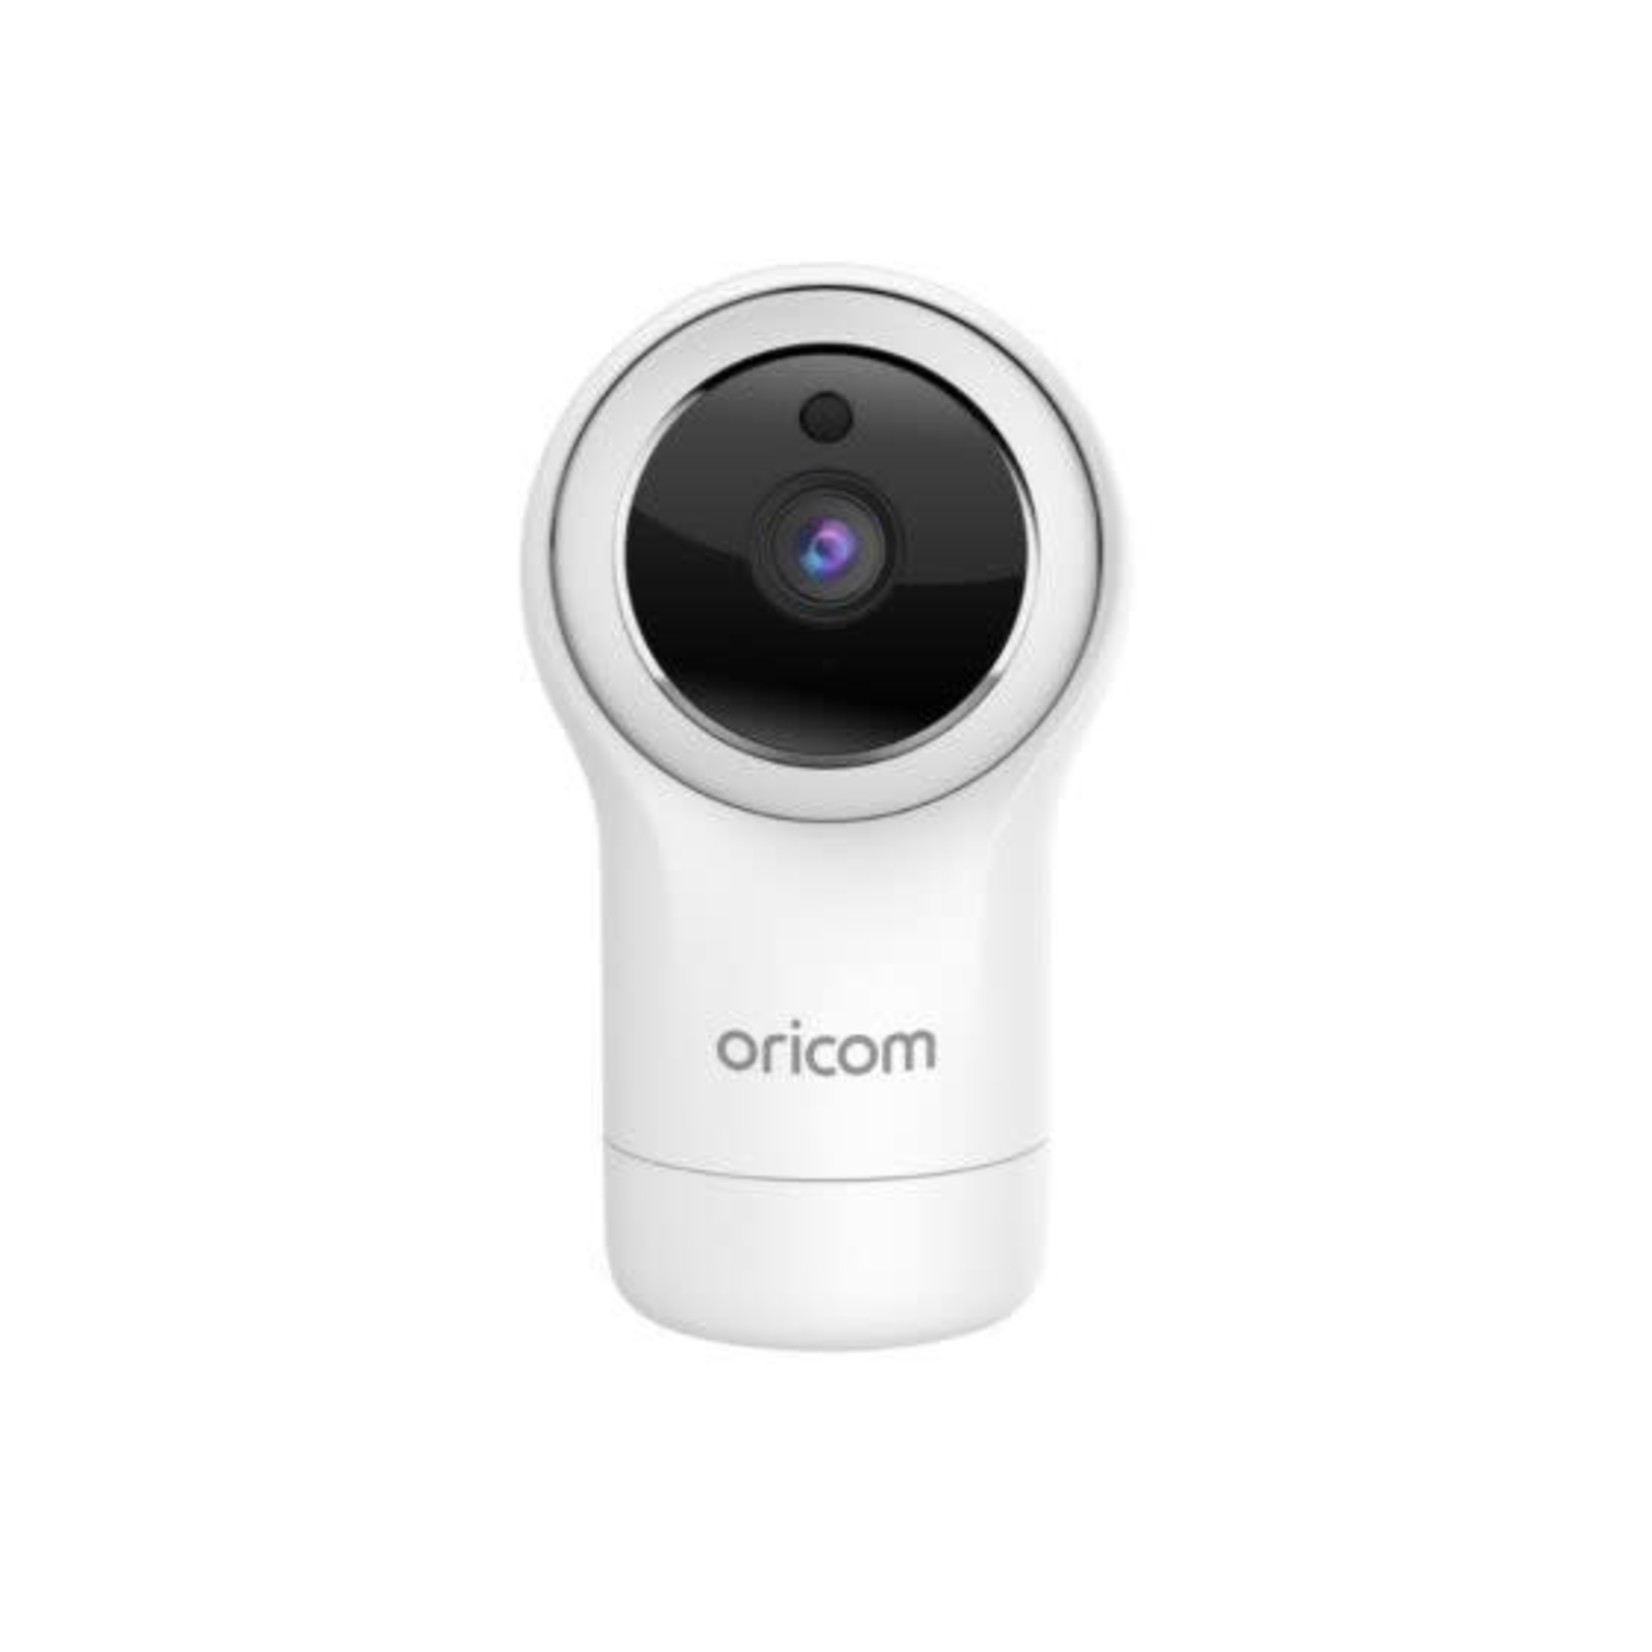 Oricom Smart 5” Video Baby Monitor with PTZ(OBH930)